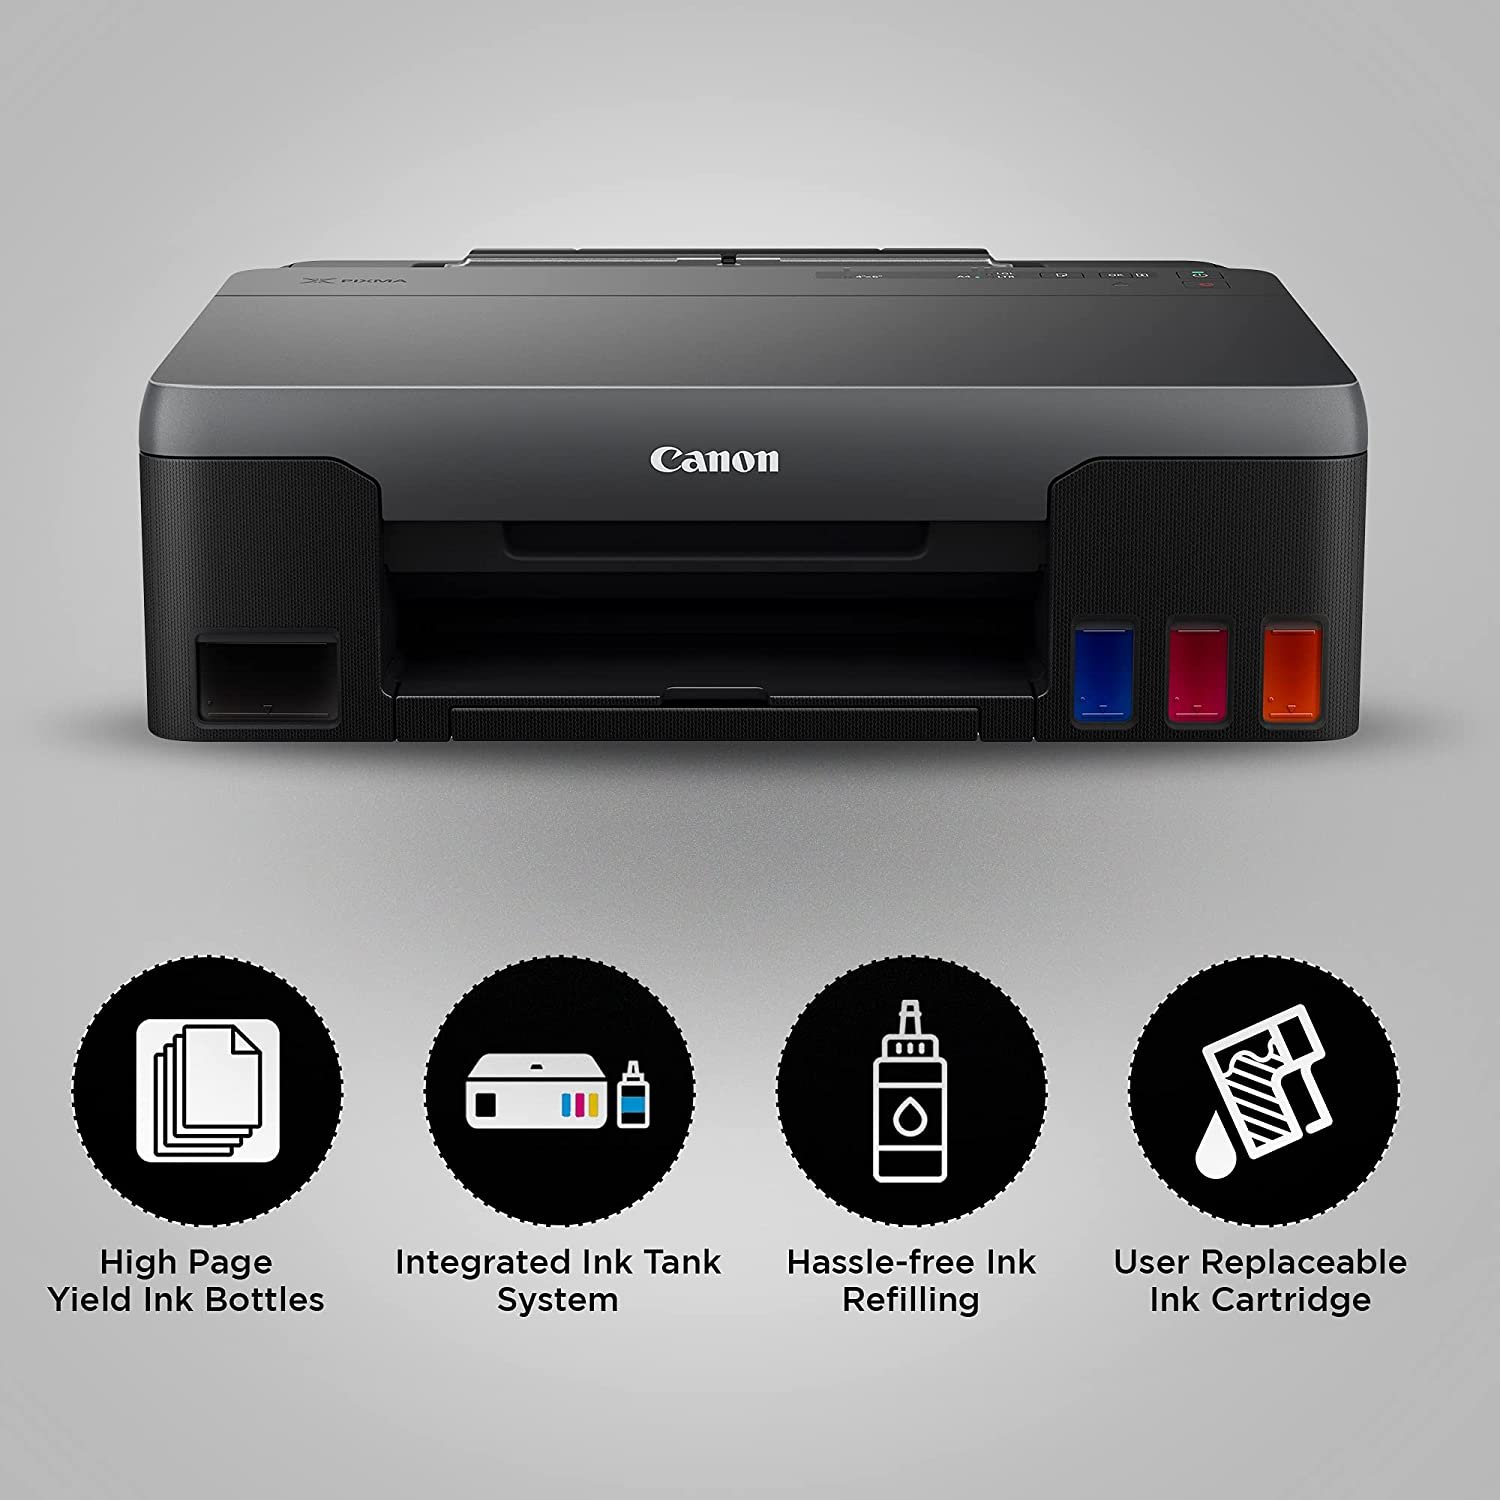 Best printer for home use & office use Canon PIXMA G1020